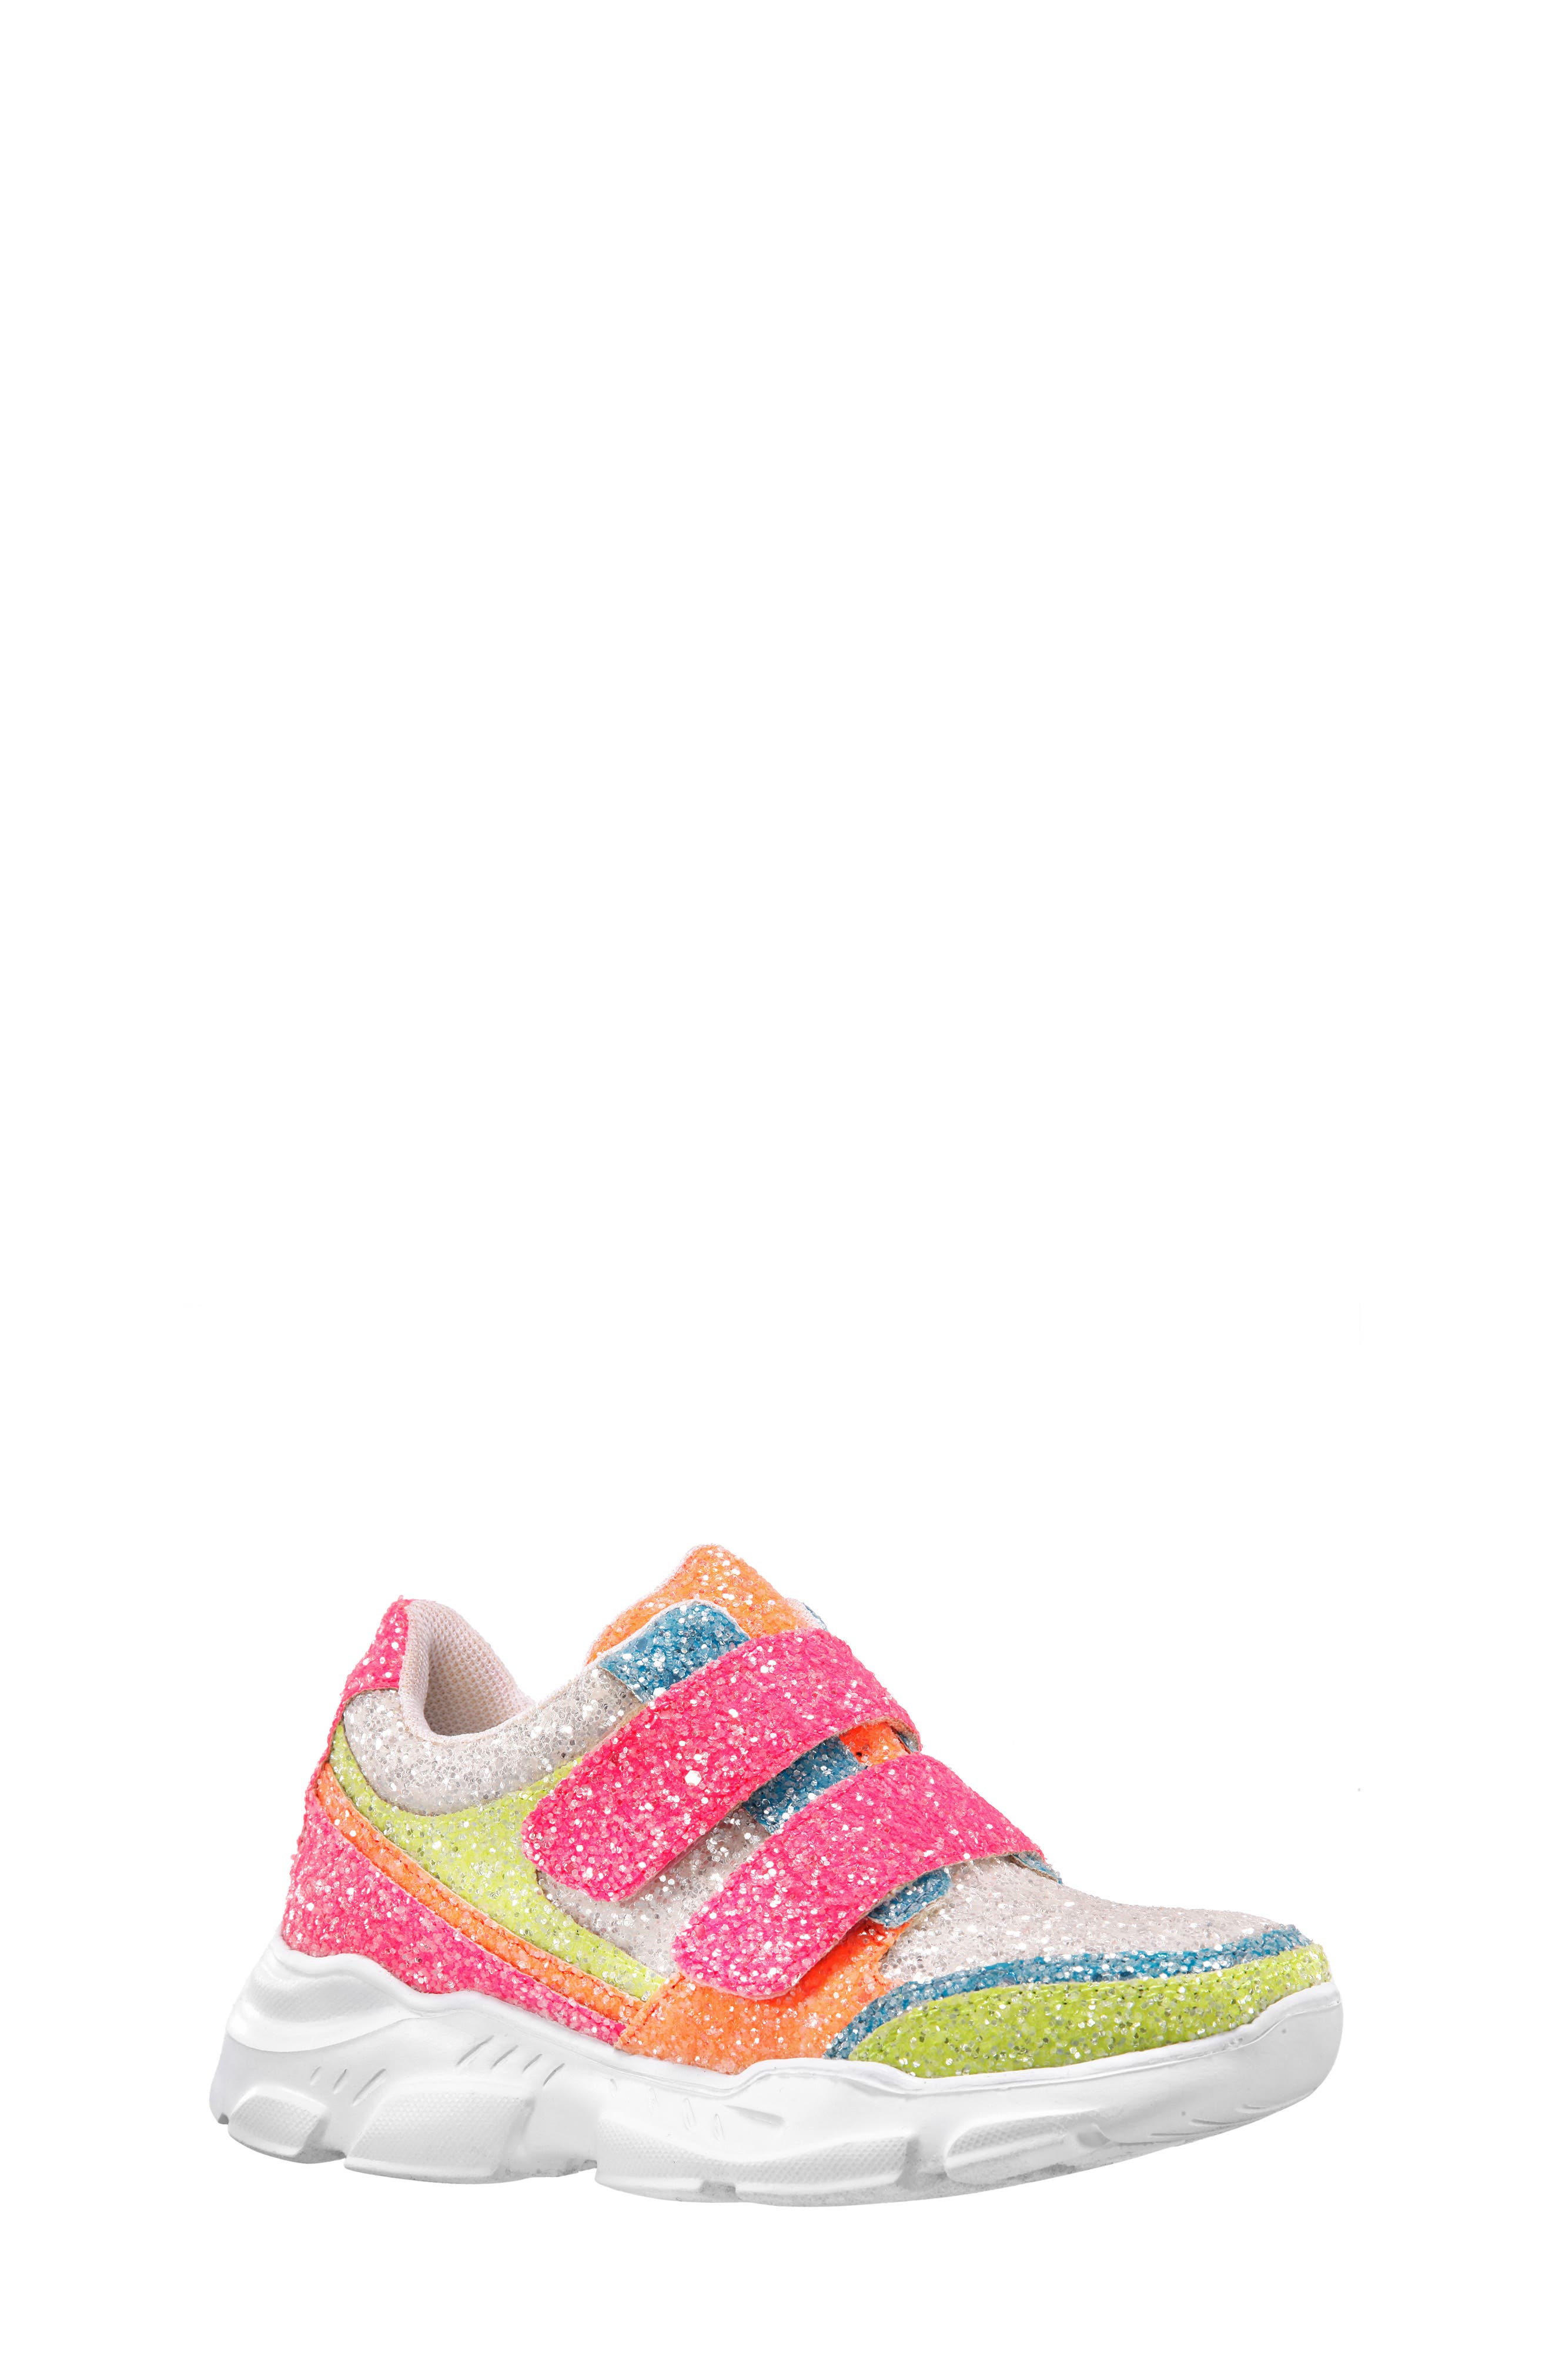 UPC 794378433255 product image for Nina Holleigh Glitter Sneaker in Neon Multi Chky Glitter at Nordstrom, Size 3 M | upcitemdb.com